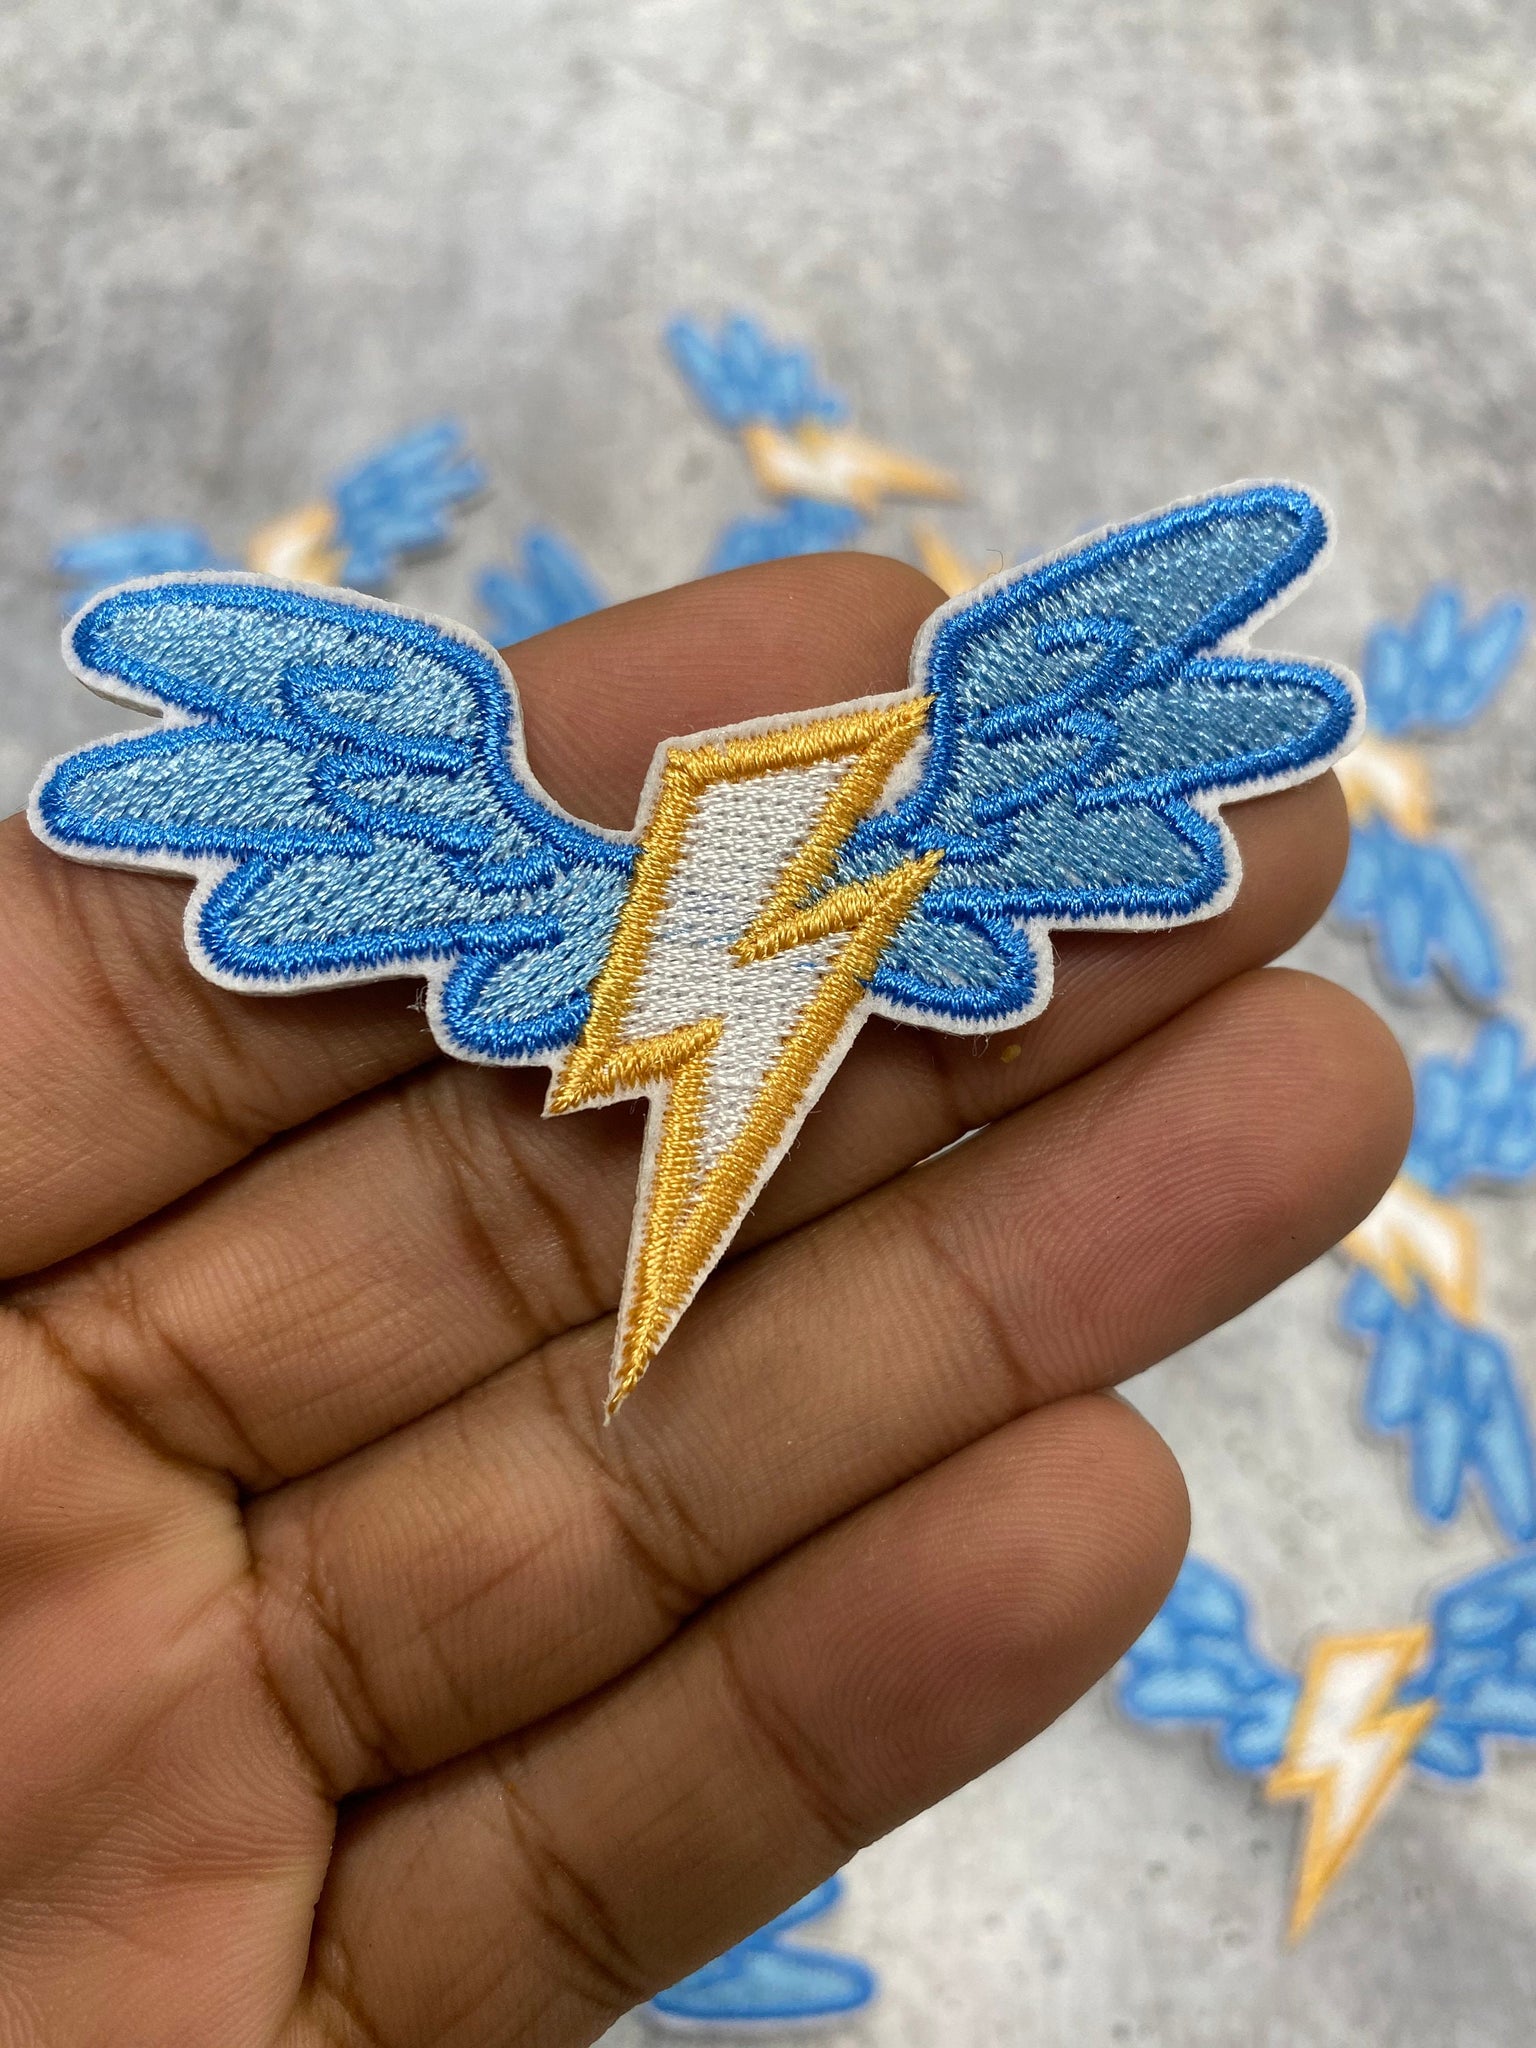 Patchclub Thunderbolt Patch, 3.5 Inches Iron On/sew on Colorful CMYK  Lightning Embroidered Patch, for Clothes, Backpacks 